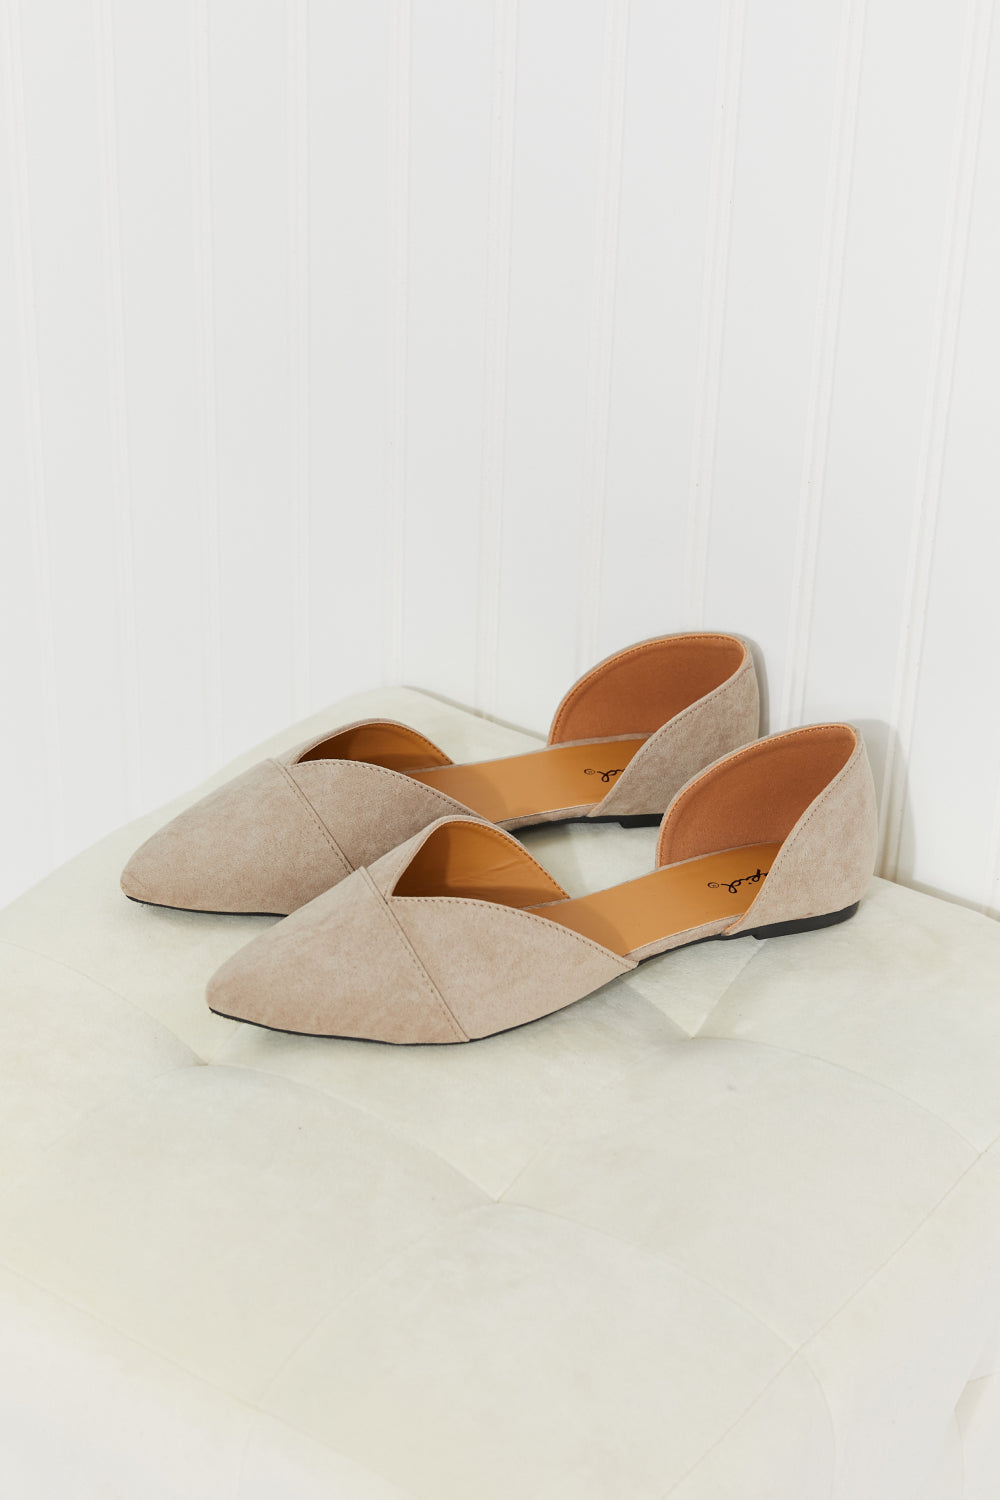 Qupid Simple and Chic Pointed Toe Ballet Flats